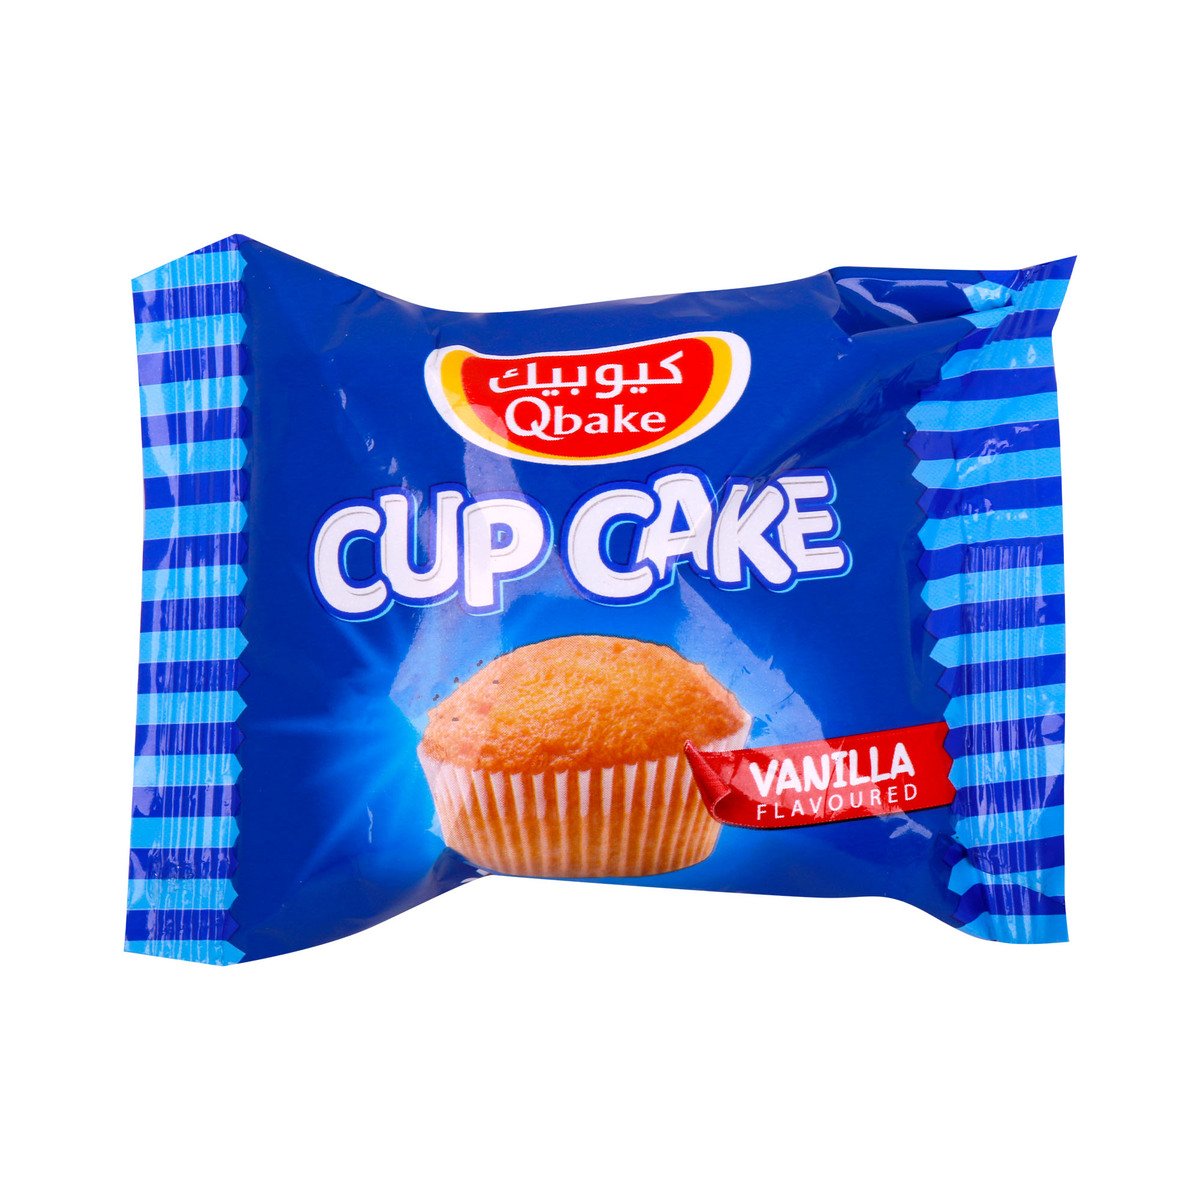 Qbake Cup Cake Vanilla 30g Online at Best Price, Brought In Cakes